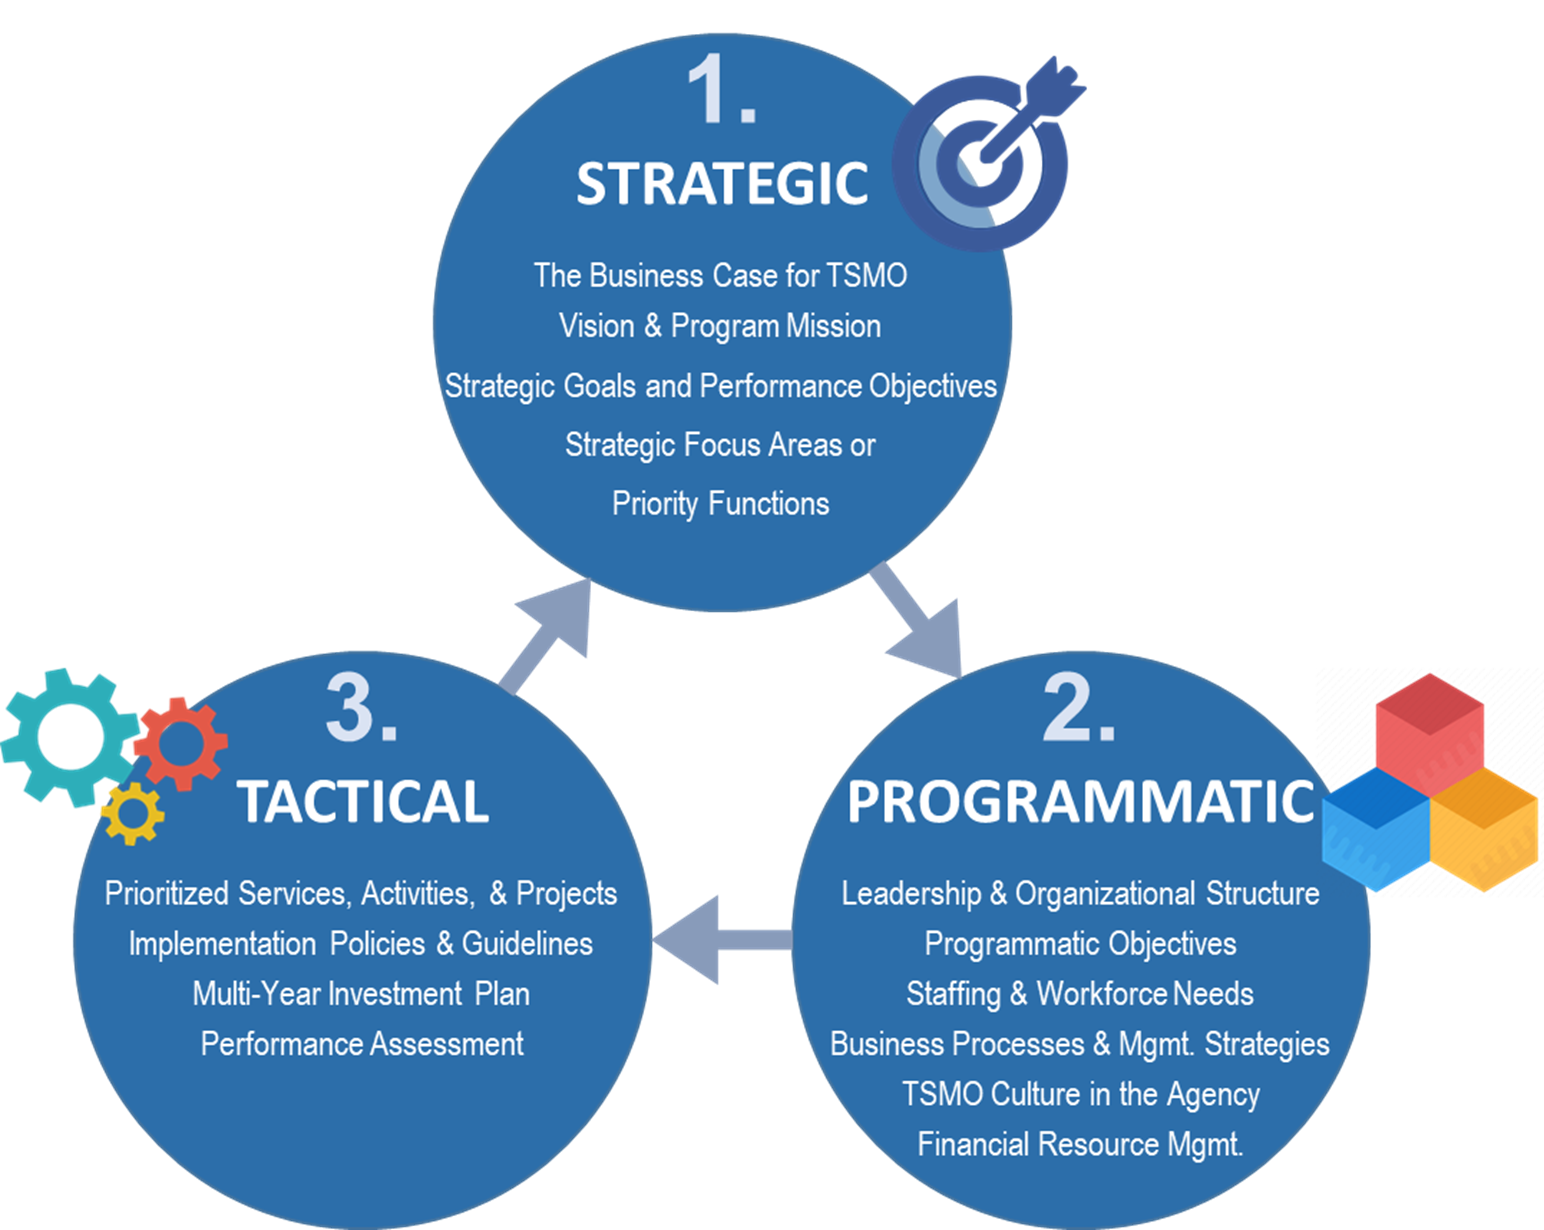 Figure shows the three basic elements of program planning: Strategic, Programmatic, and Tactical.  Each element is described in the following paragraphs.